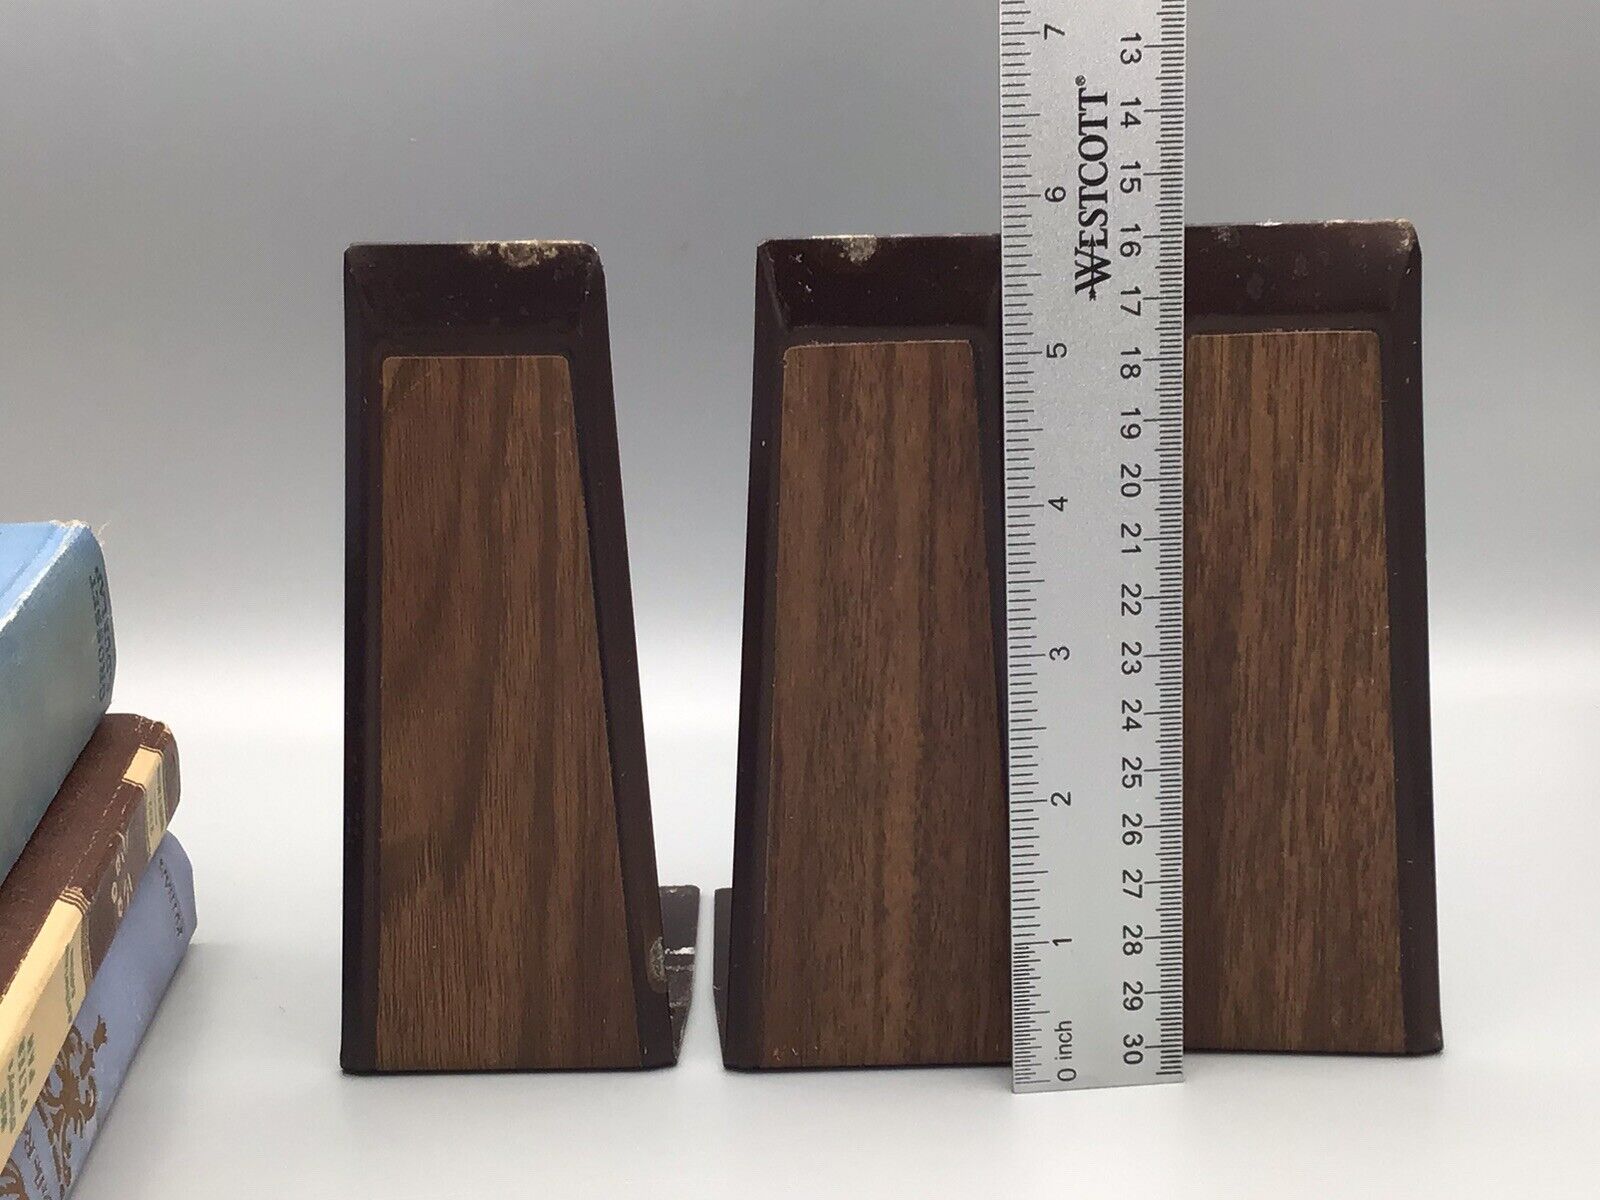 VTG Mcm 3 Bookends Metal Minimalist Library Desk Wood Grain invisible ￼